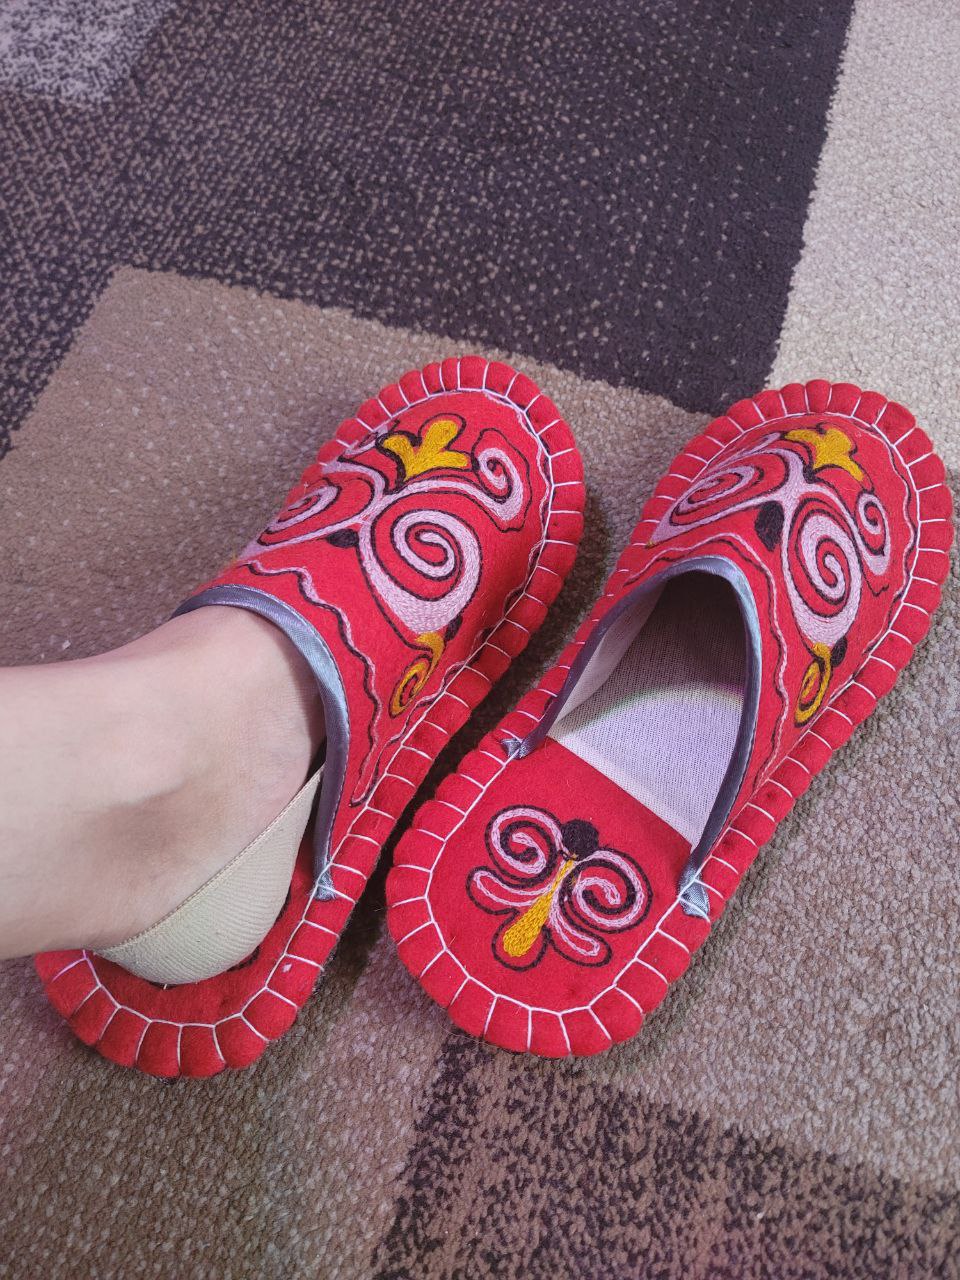 red felt slippers with traditional Kyrgyz motifs embroidered(?) on them